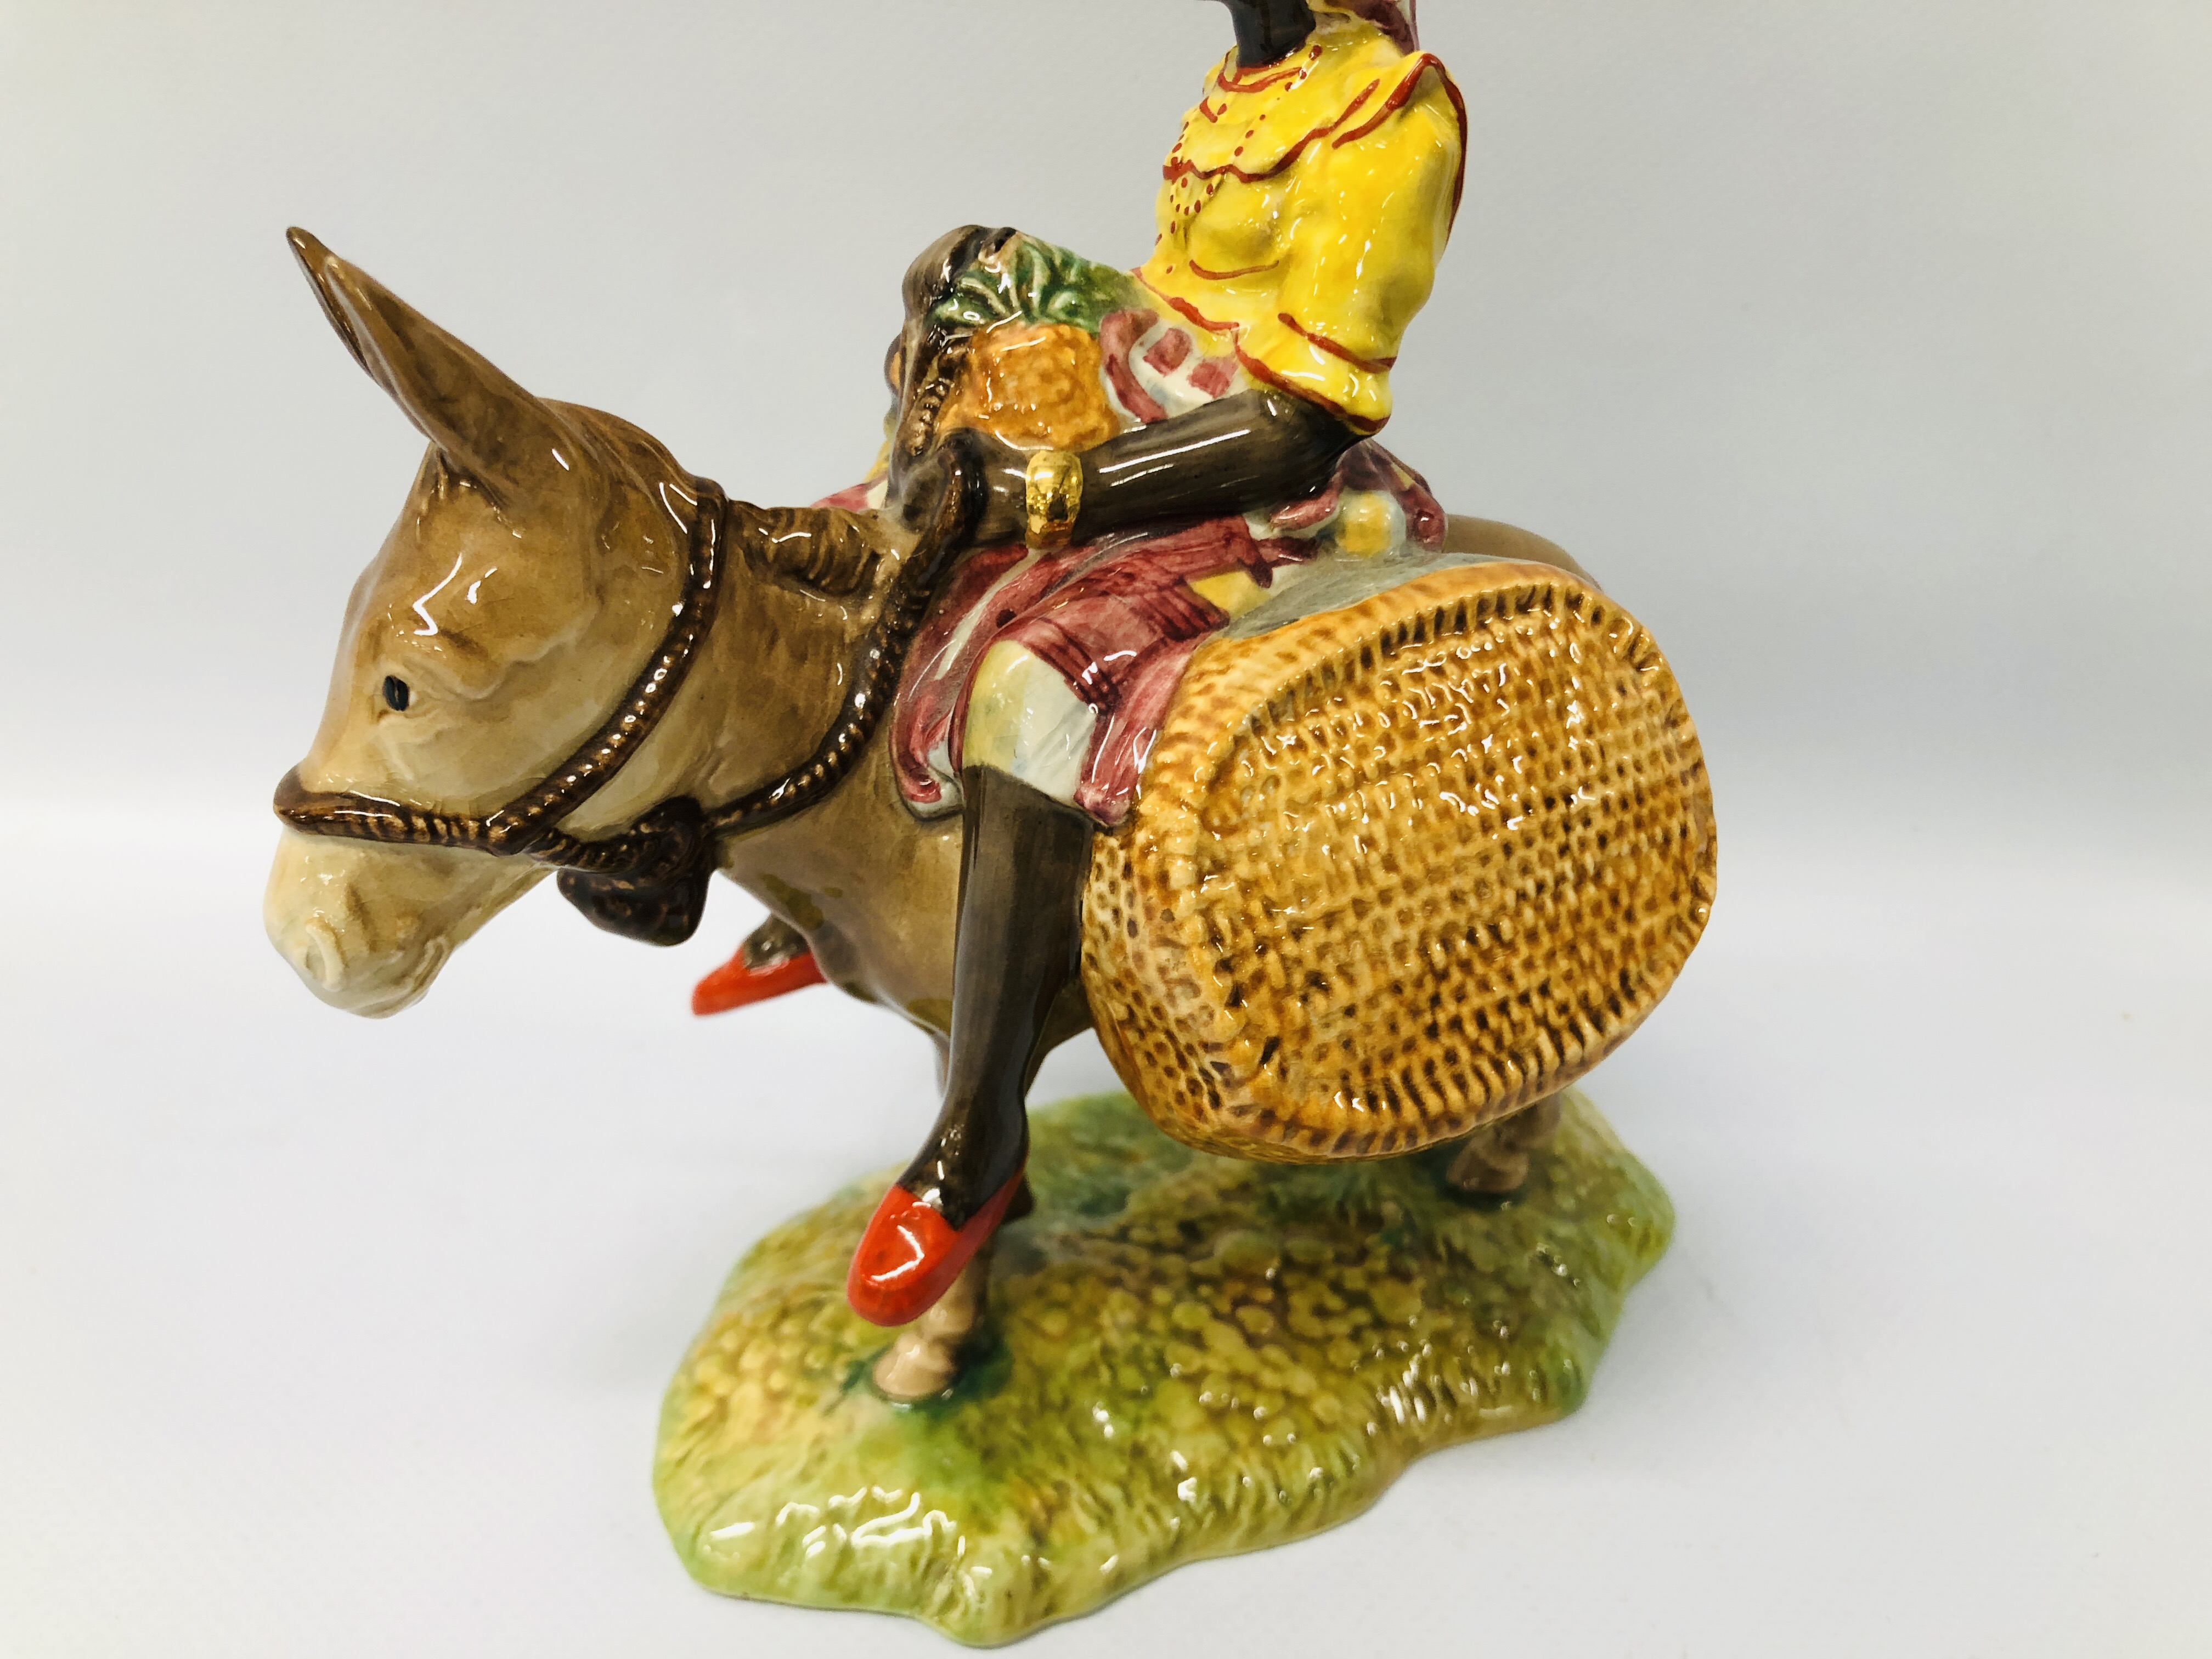 BESWICK "SUSIE JAMAICA" FIGURE ALONG WITH A MINIATURE BESWICK BENEAGLES WHISKY DECANTER (EMPTY) - Image 11 of 13